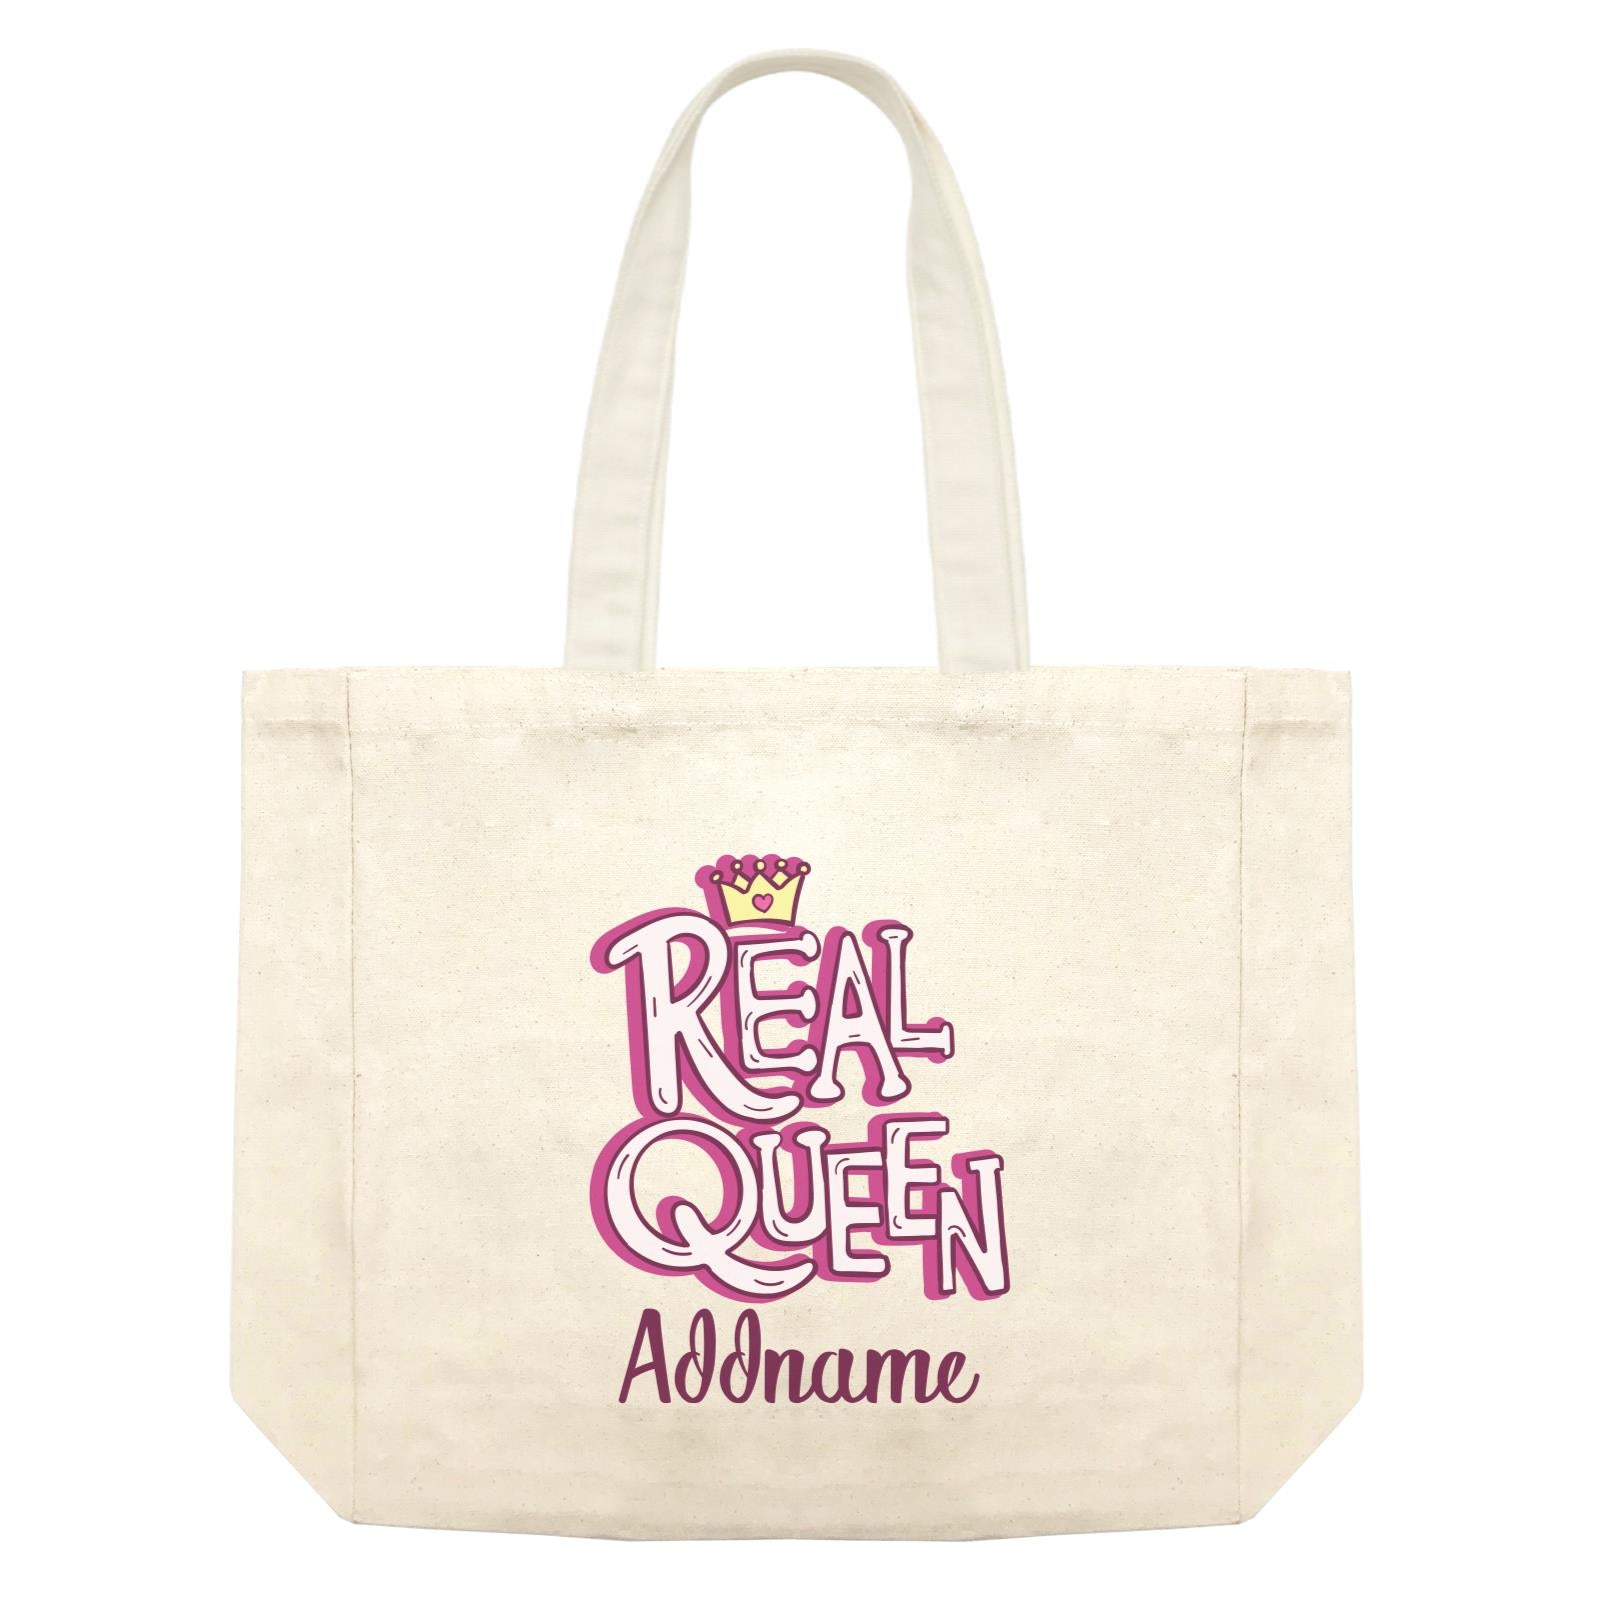 Cool Cute Words Real Queen Addname Shopping Bag